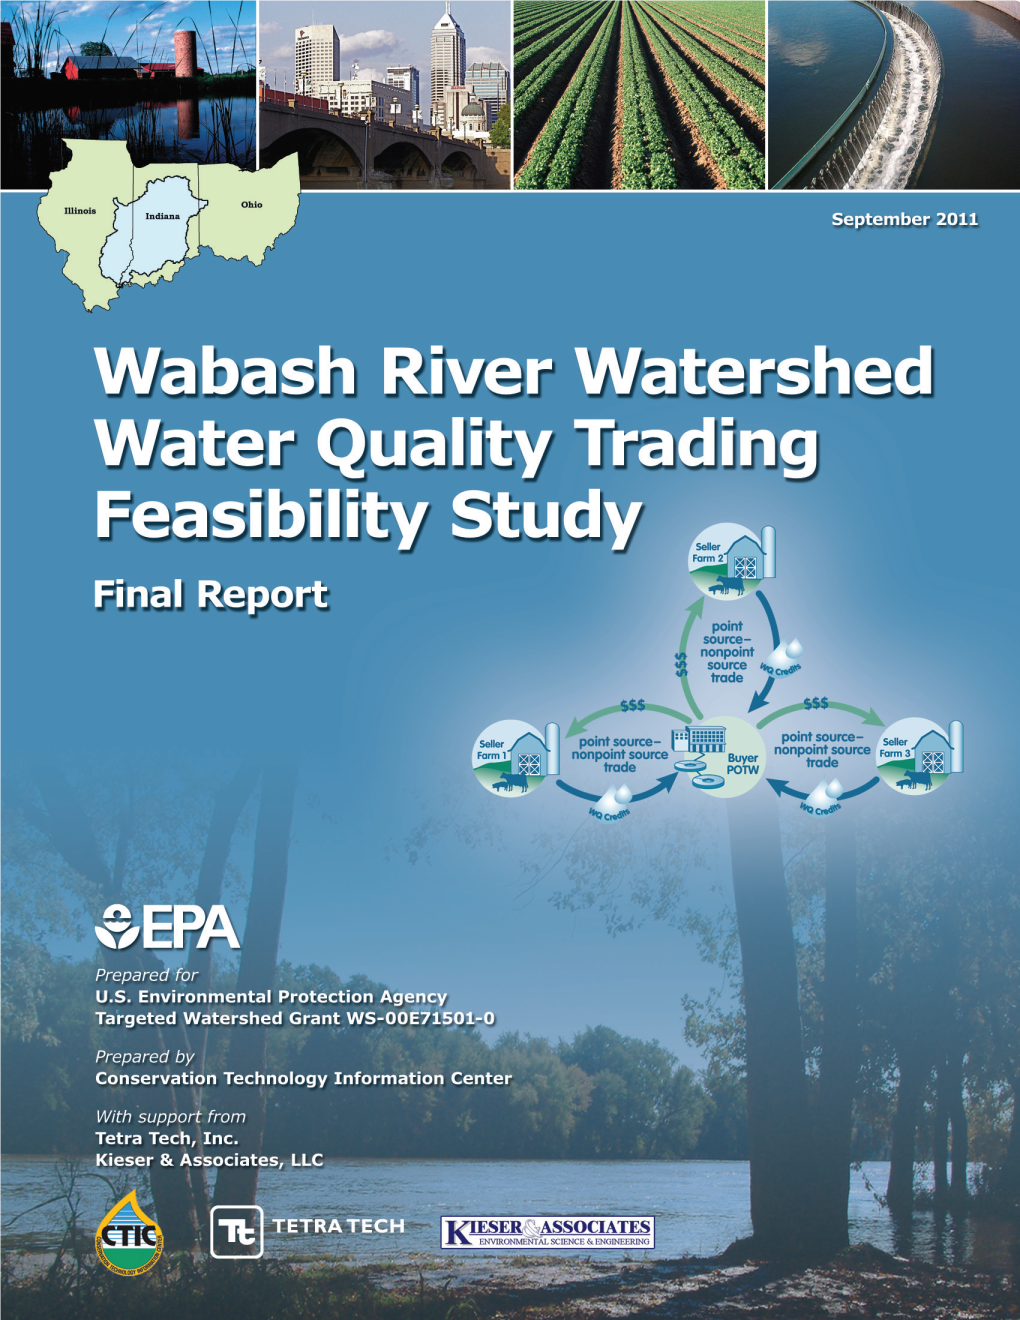 Wabash River Watershed Water Quality Trading Feasibility Study